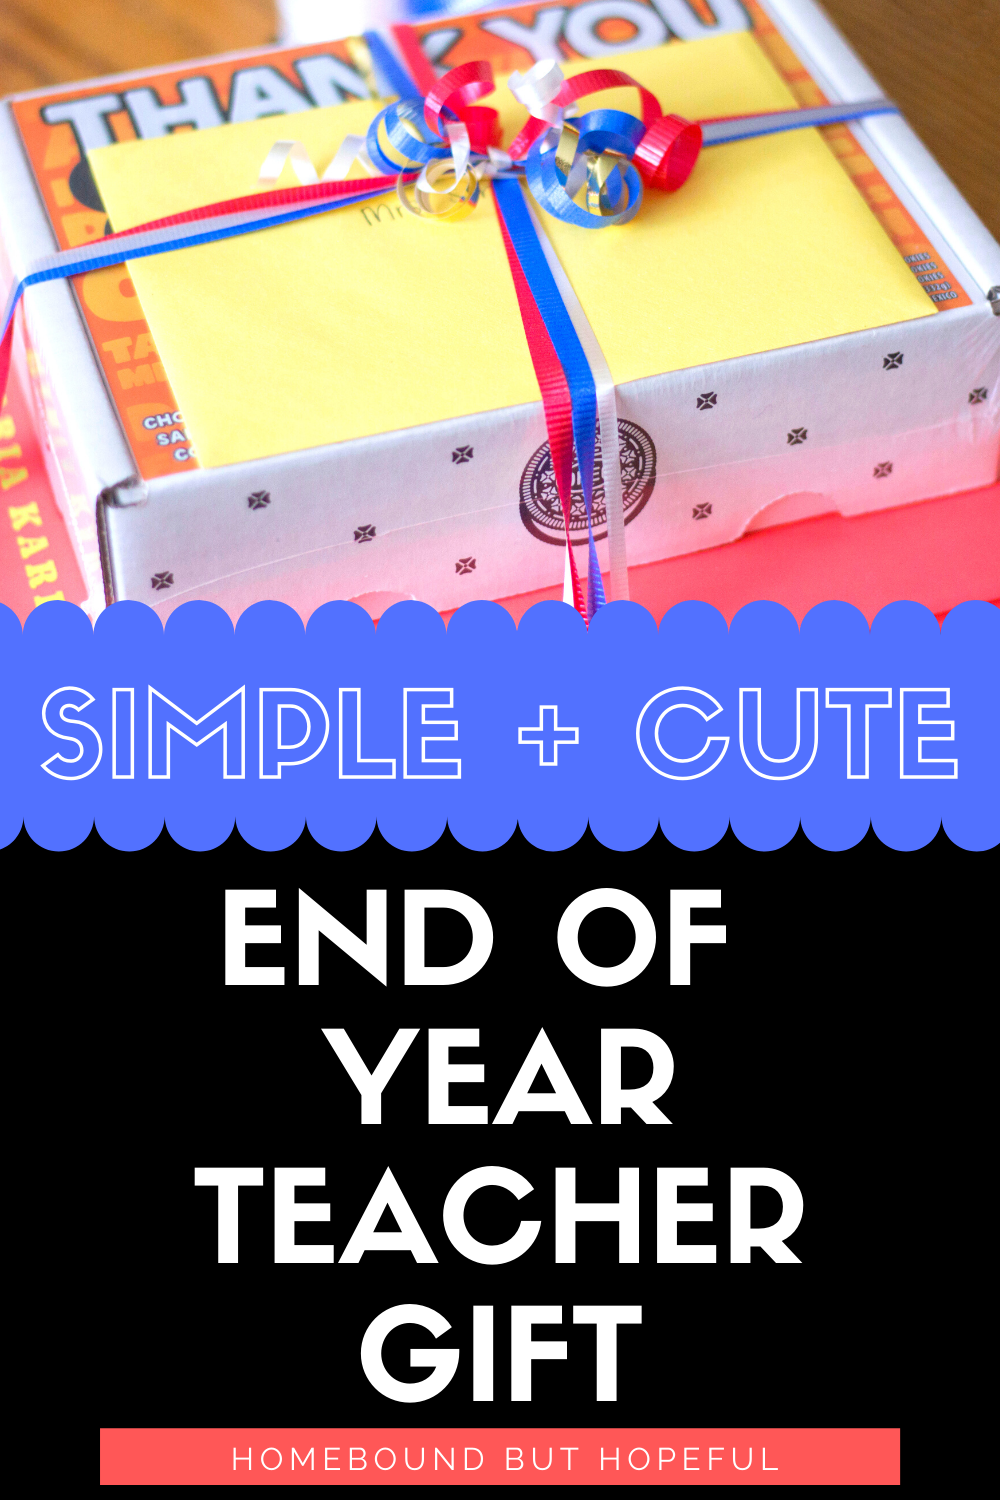 If you're still on the hunt for a simple, cute, and super-sweet end of year teacher gift, look no further! #teacherappreciation #thankateacher #teachergifts #teachergift #onesmartcookie